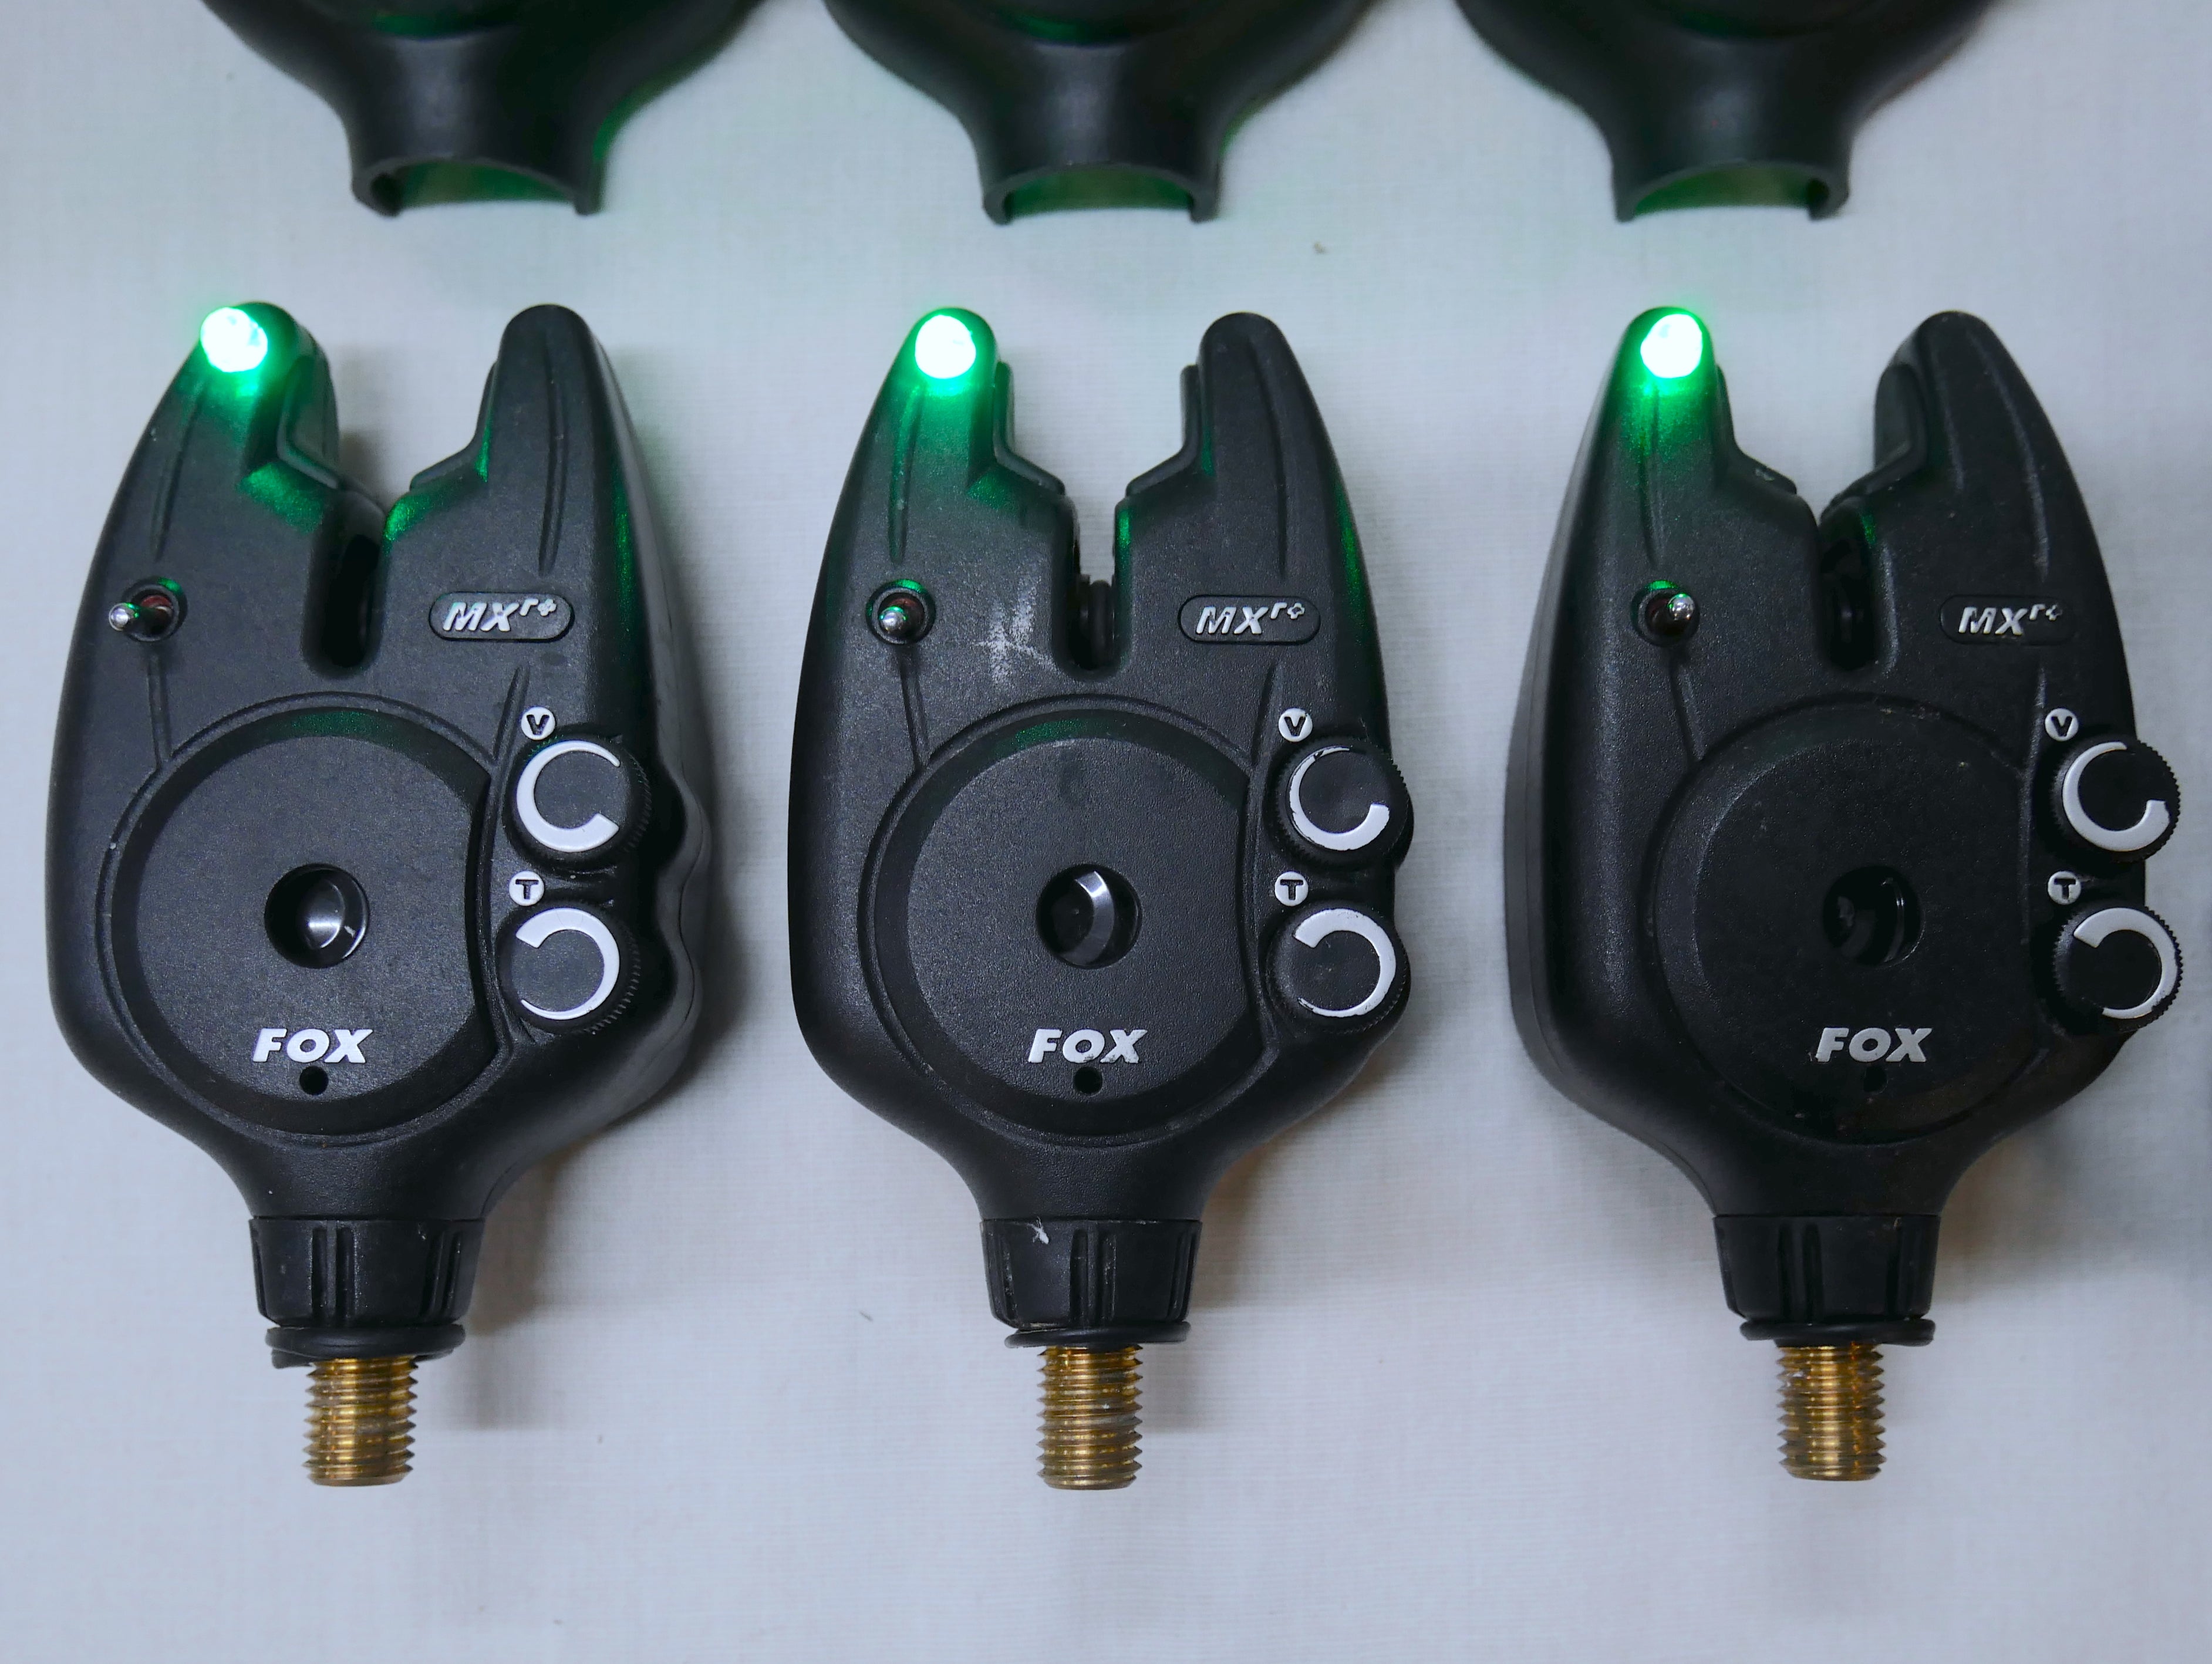 Fox Micron MXr+ Bite Alarms X3 + Receiver – Fish For Tackle